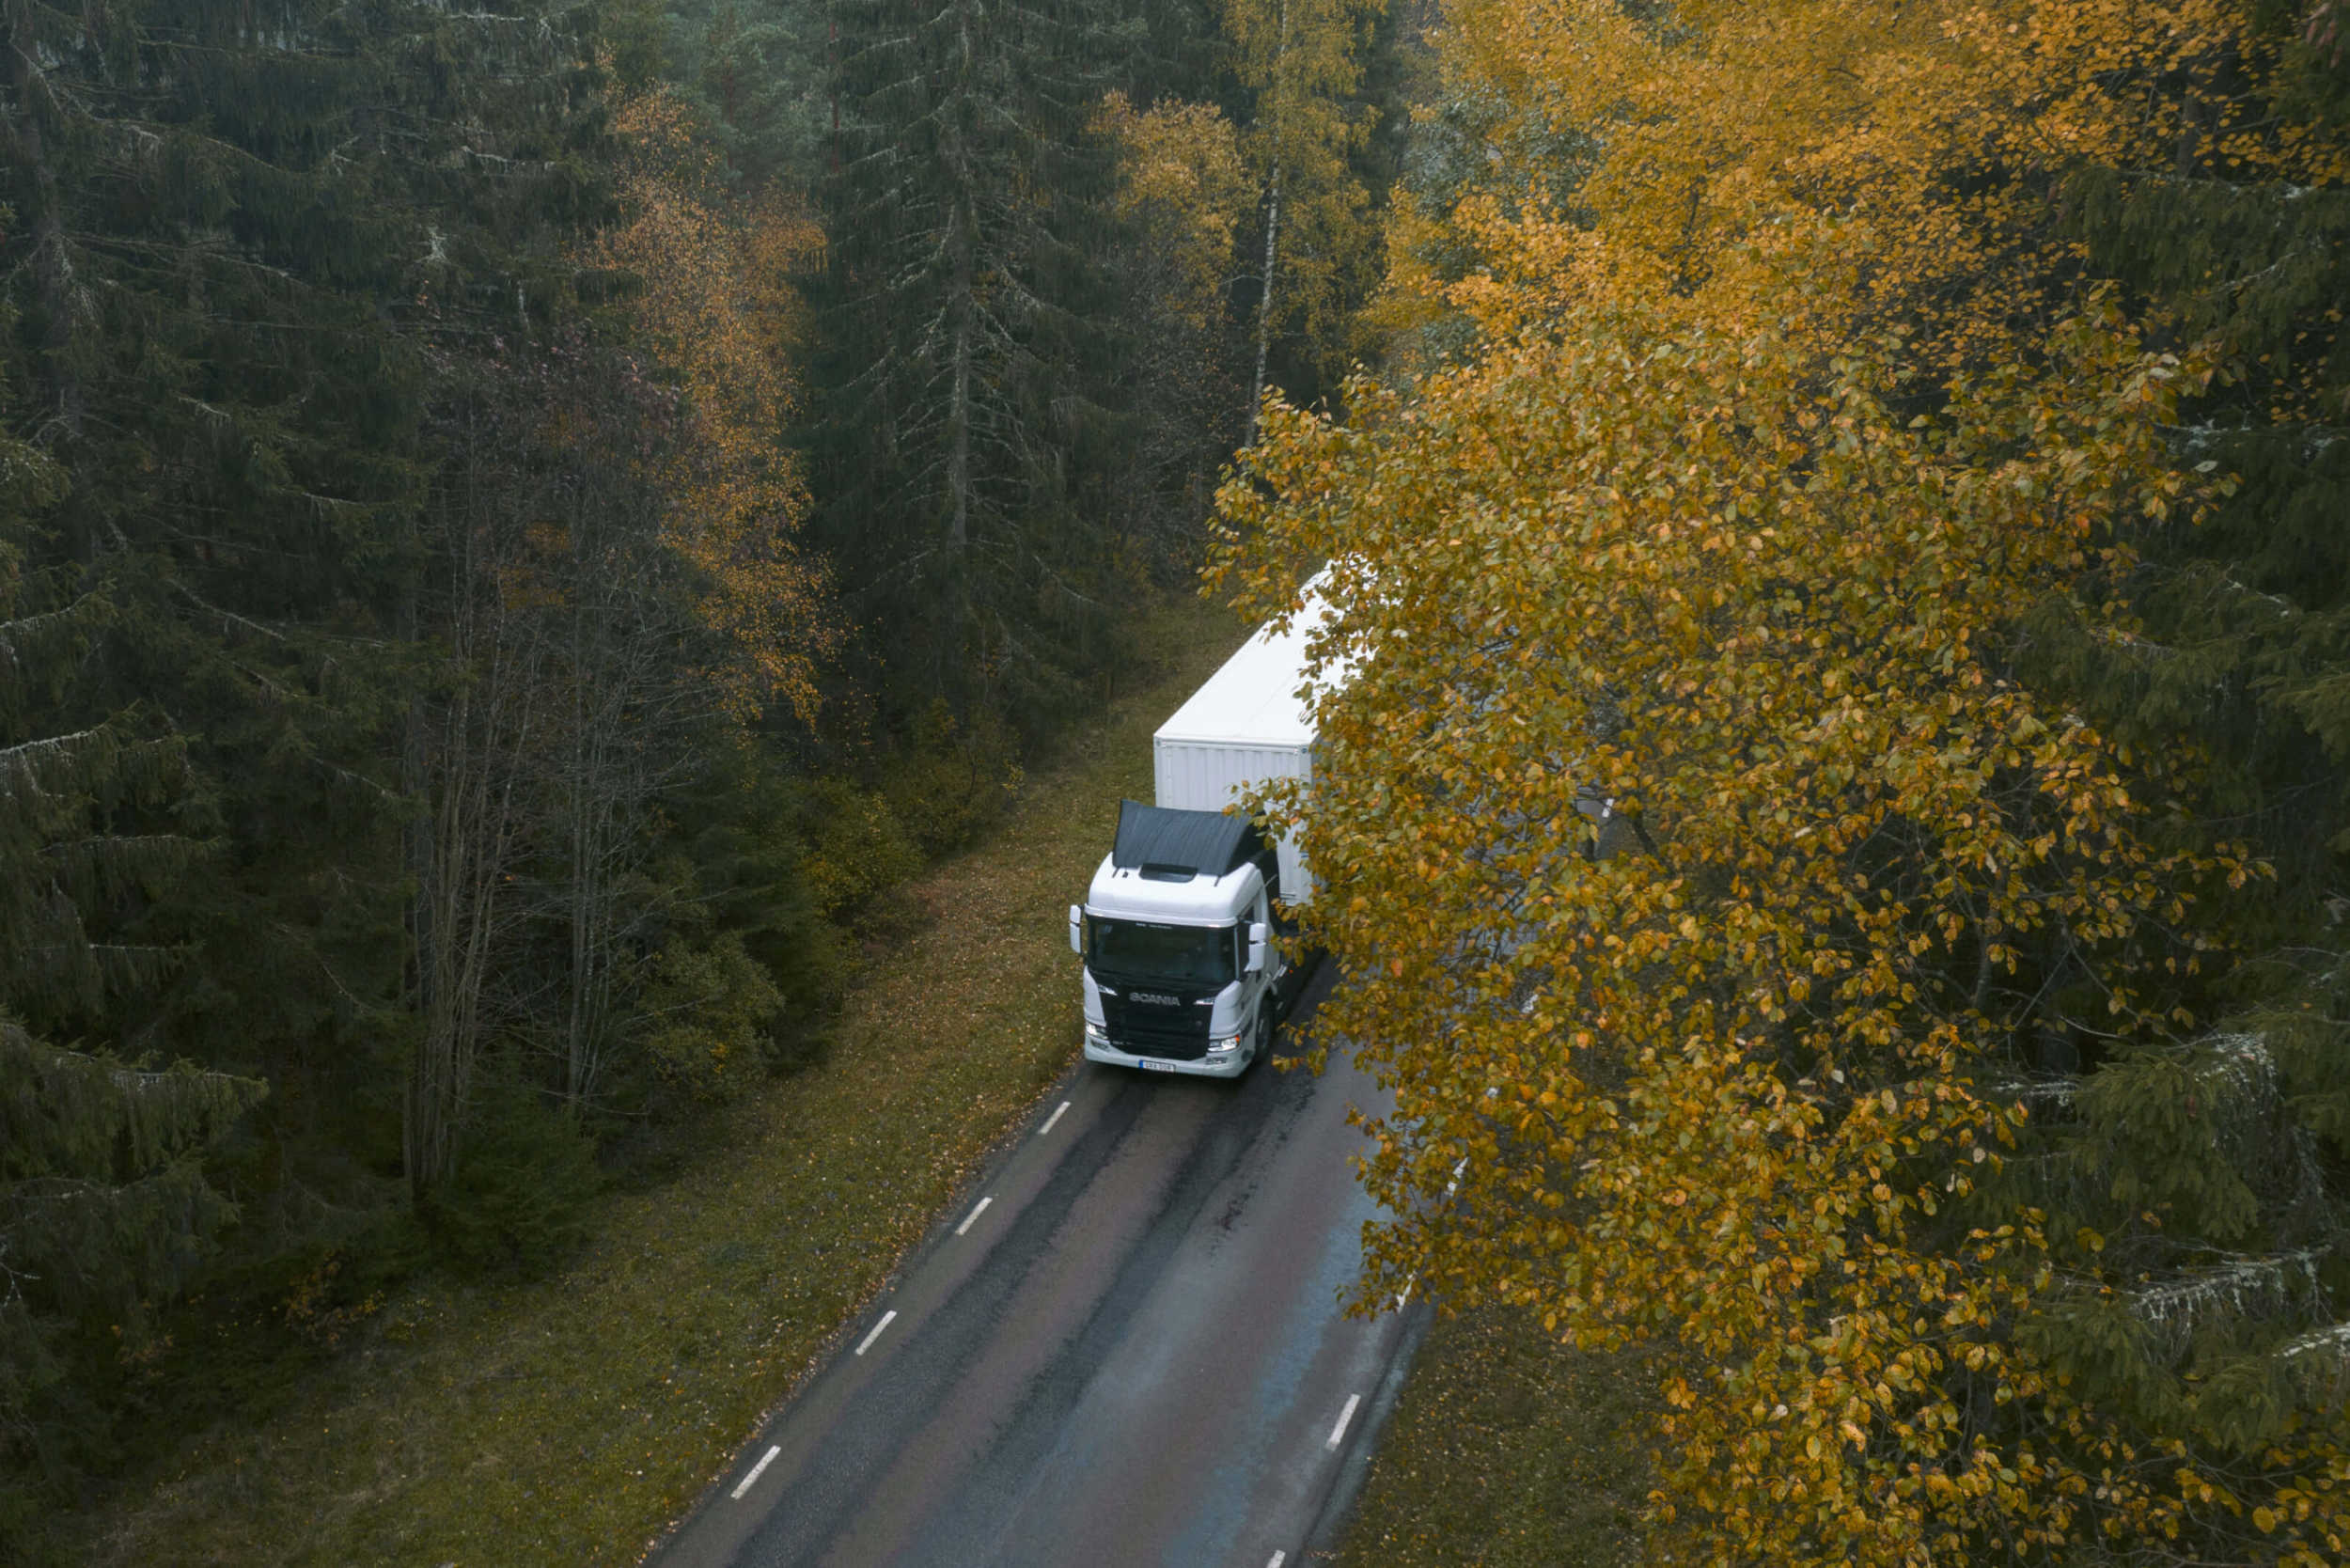 The Einride electric truck front in a fall forest